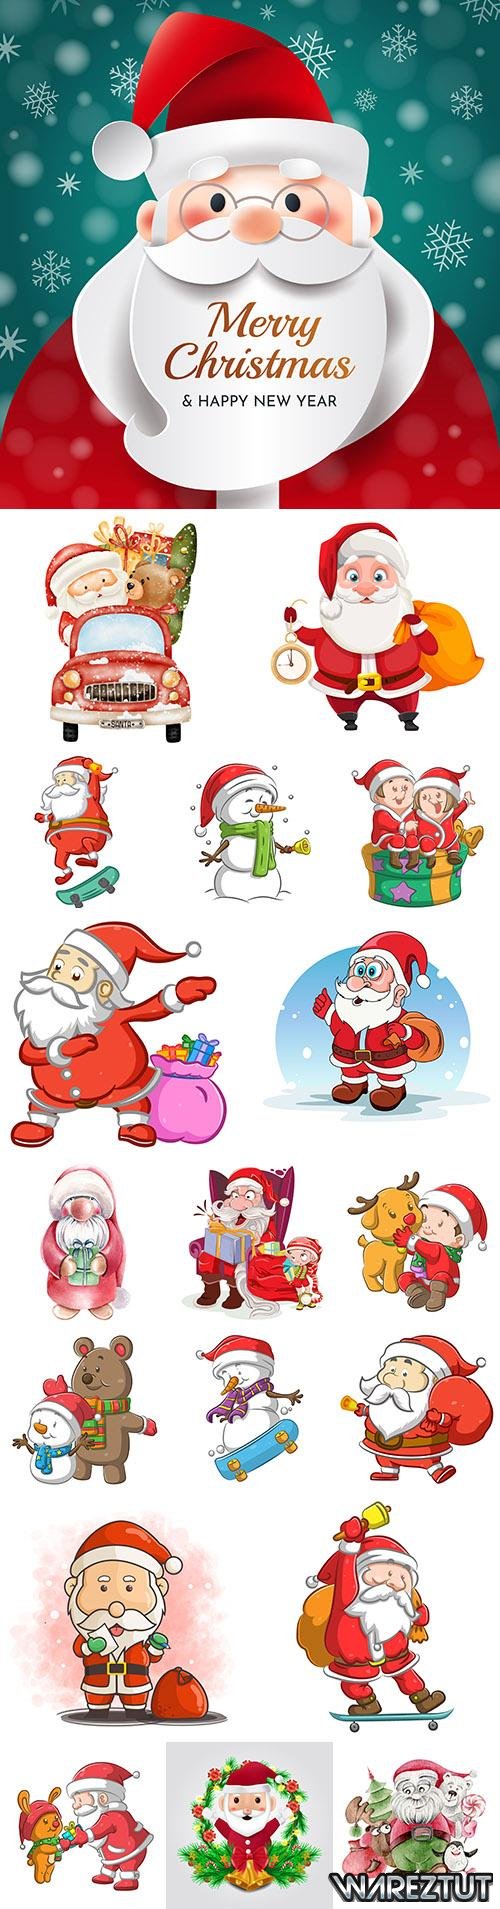 Santa Claus funny character with Christmas gift illustrations collection